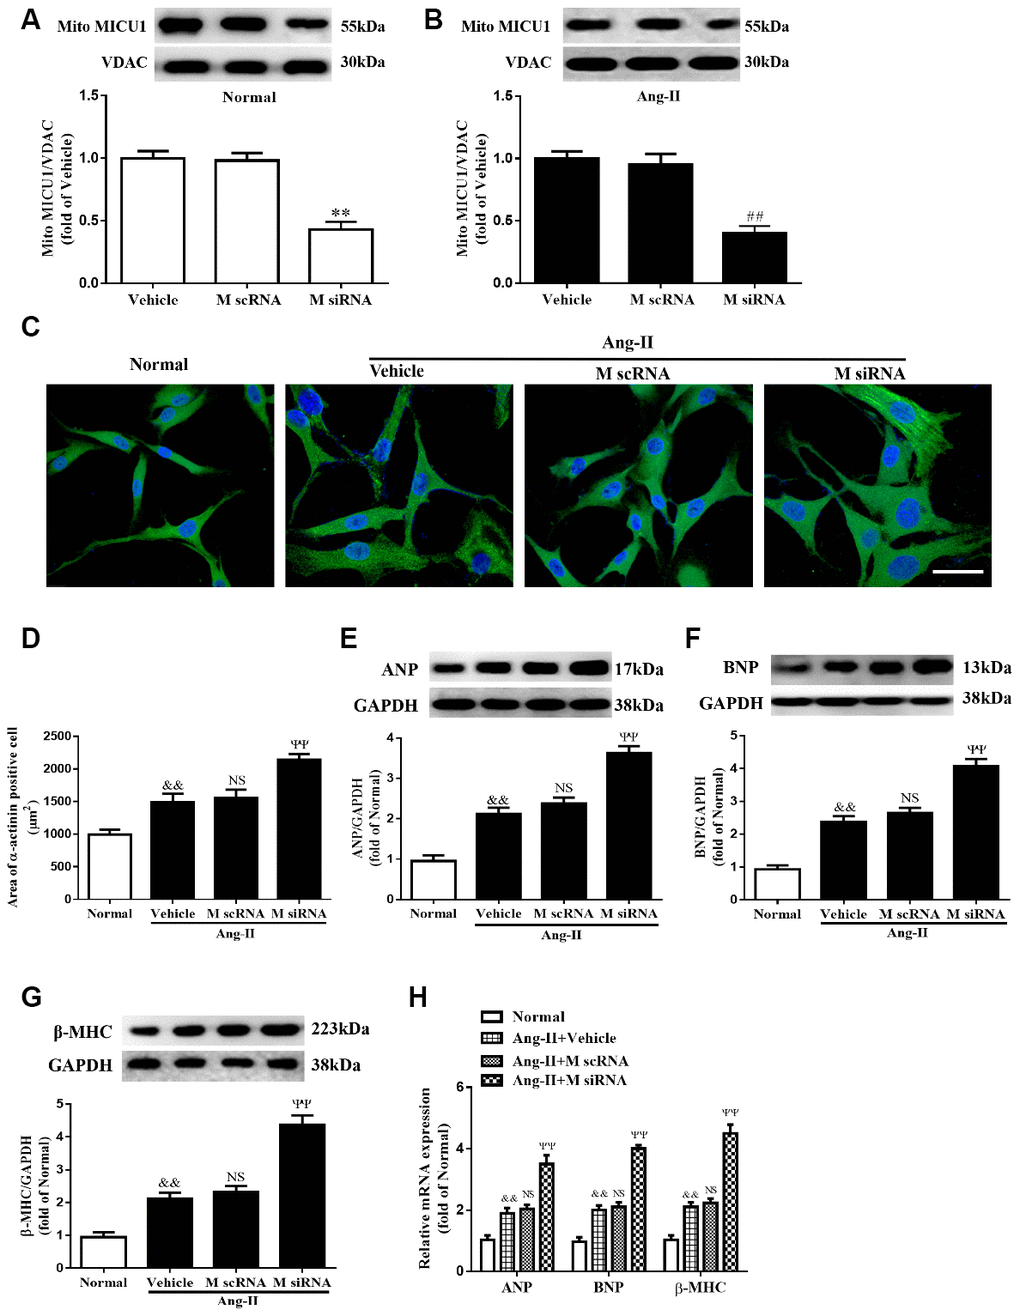 Knockdown of MICU1 exacerbated Ang-II-induced cardiomyocyte hypertrophy in vitro. (A, B) Western blotting was used to measure the transfection efficiency of MICU1 siRNA in neonatal mice ventricular myocytes (NMVMs) (A) and Ang-II treated NMVMs (B). (C, D) Cell surface areas were measured in neonatal mice ventricular myocytes (NMVMs) stimulated with Ang-II (C) and representative images of α-actinin (red)-and DAPI (blue)-stained cardiomyocytes were followed by cell area quantifications (D). Scale bars=10 μm. (E–G) Western blotting was used to measure protein levels of ANP (E), BNP (F) and β-MHC (G) in NMVMs. (H) The mRNA expression of ANP, BNP and β-MHC in NMVMs was detected by qRT-PCR. ANP, atrial natriuretic peptide; BNP, brain natriuretic peptide; β-MHC, β-myosin heavy chain. All the data represent the means ± SEM. N=6-8/group. **P##P&&PΨΨP